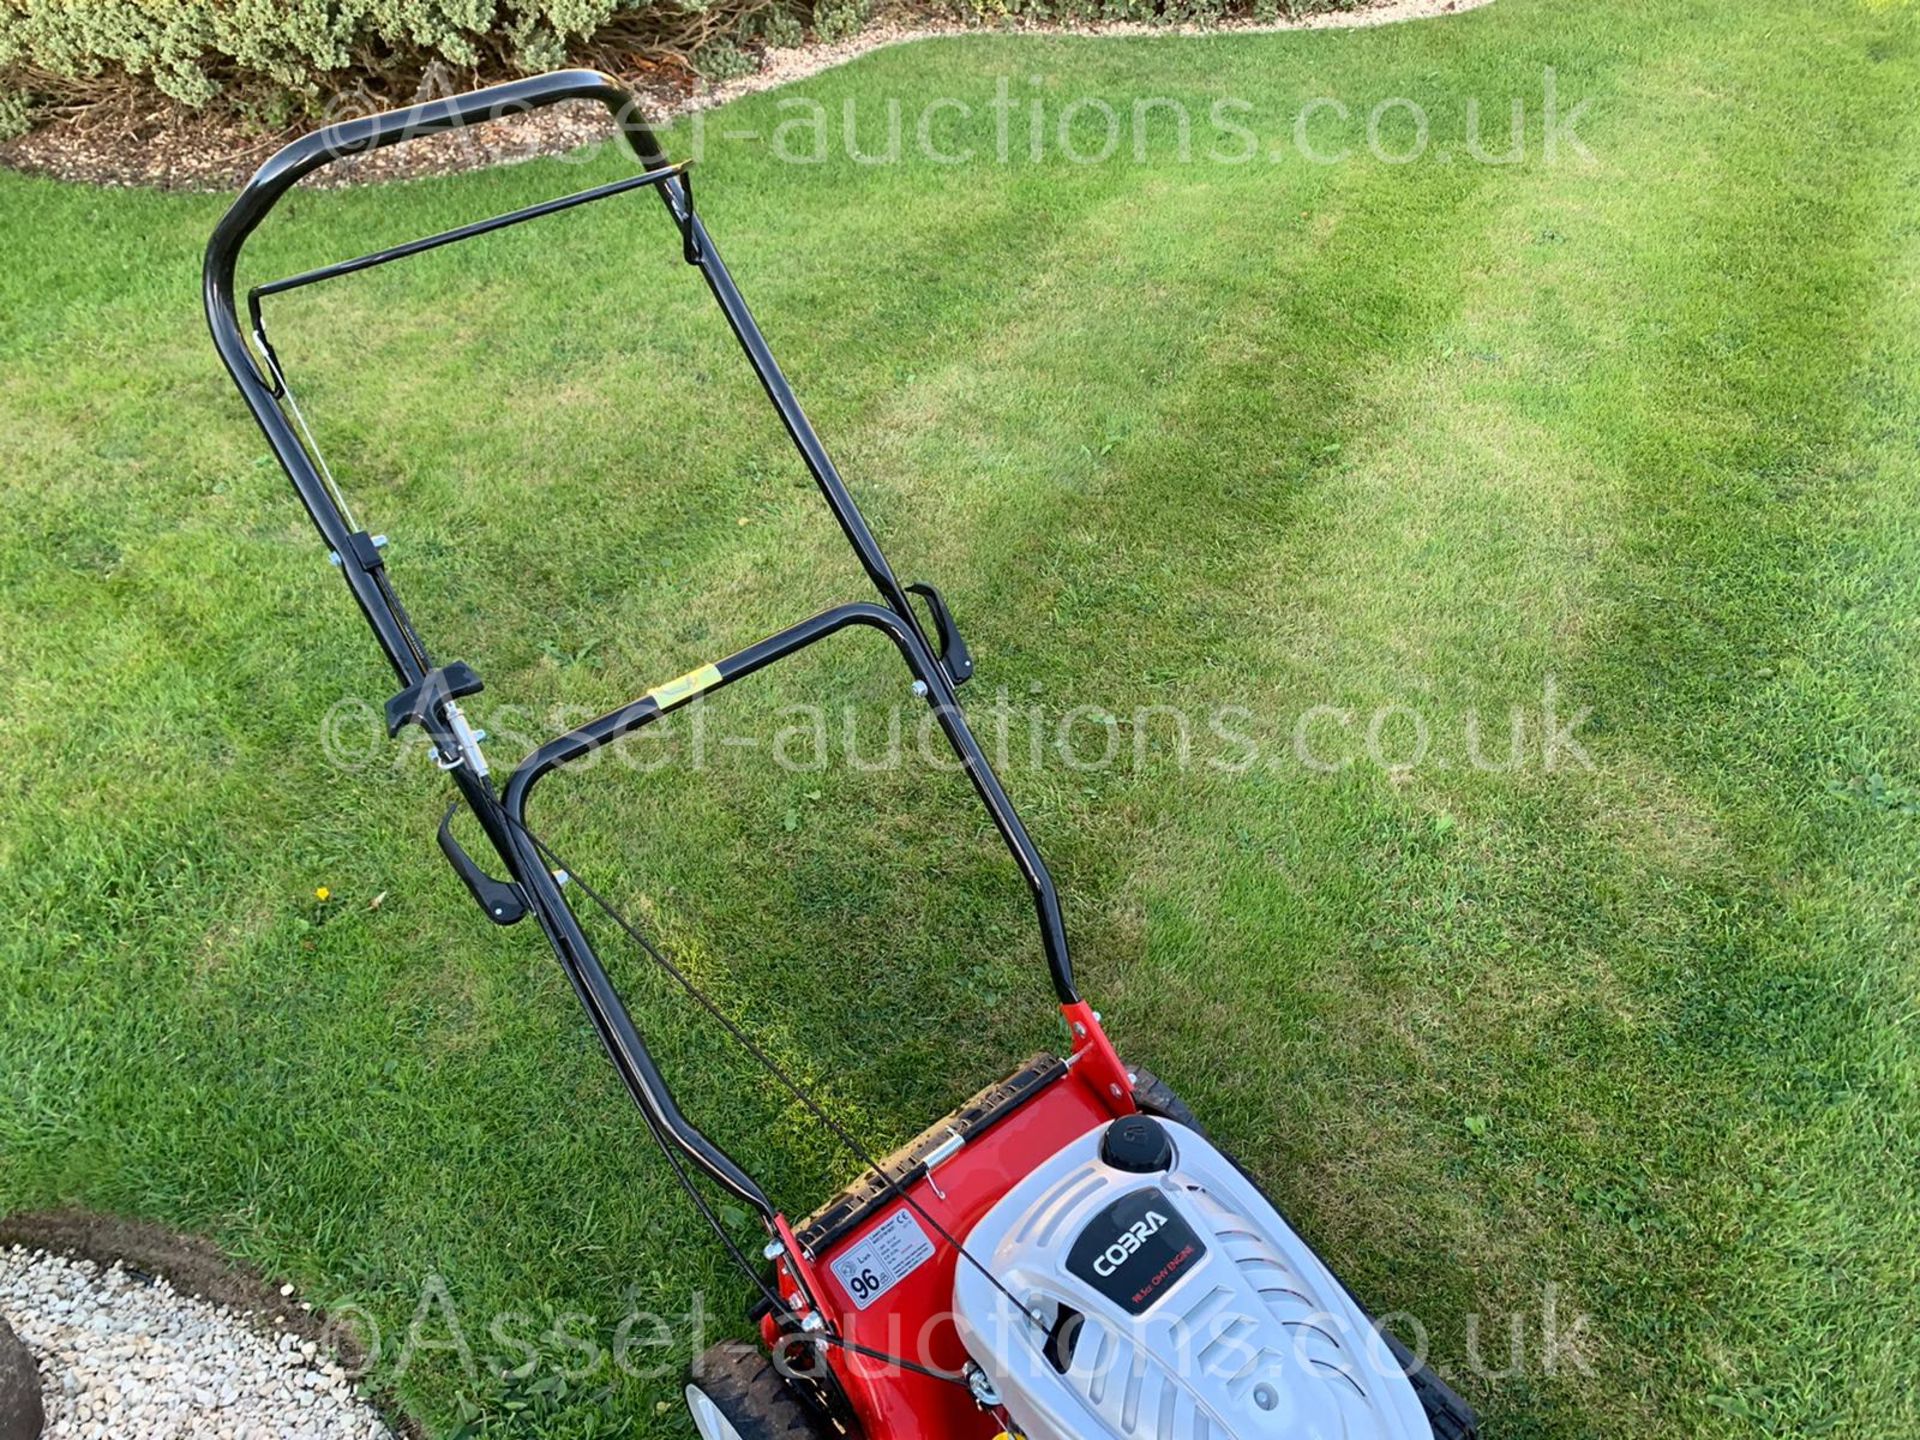 2016 COBRA M40C LAWN MOWER, RUNS AND WORKS WELL, ONLY USED A FEW TIMES, PULL START *NO VAT* - Image 11 of 18